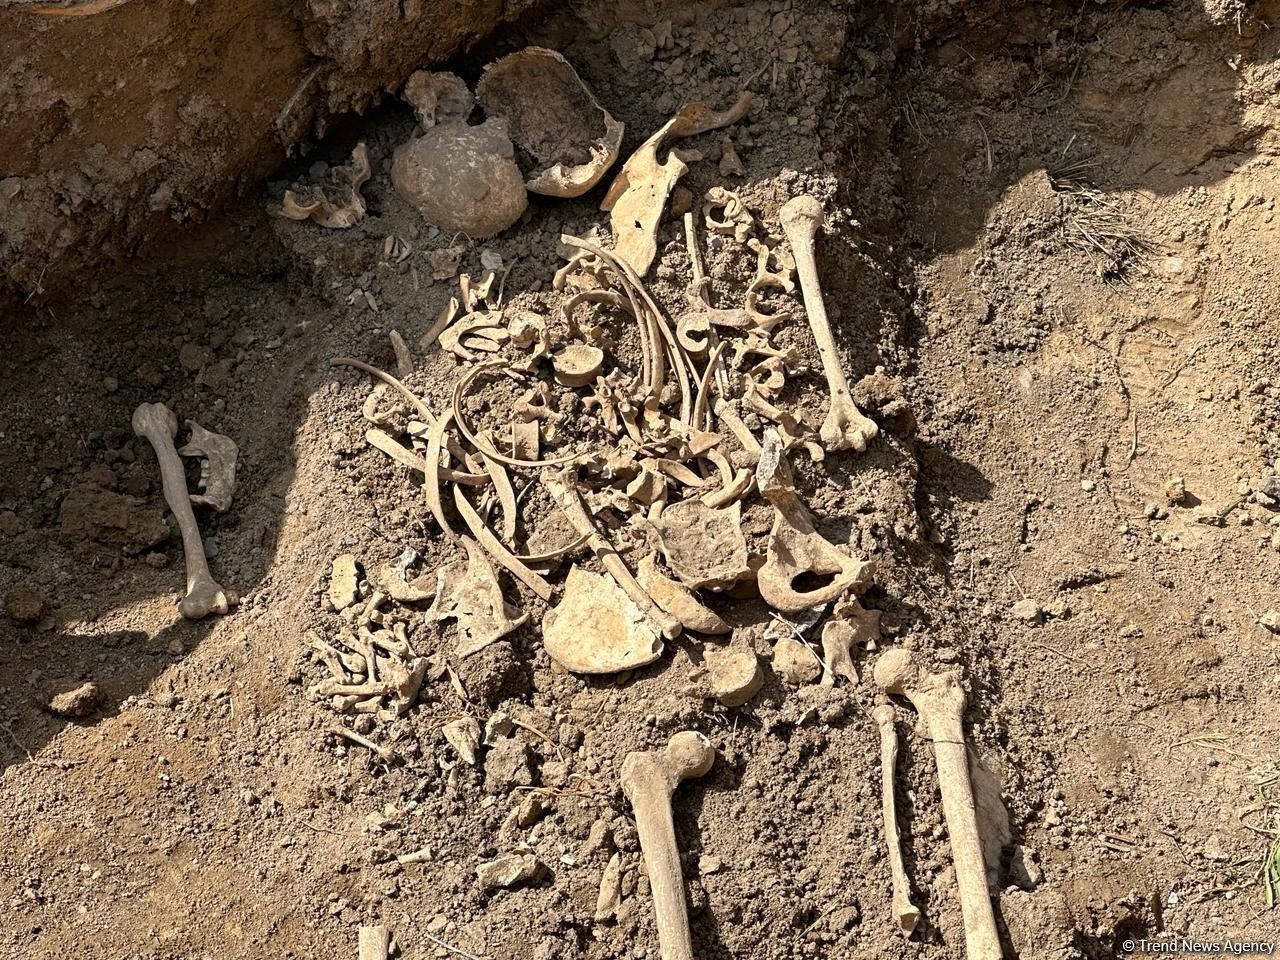 Human remains found in liberated Khojaly city [PHOTOS]